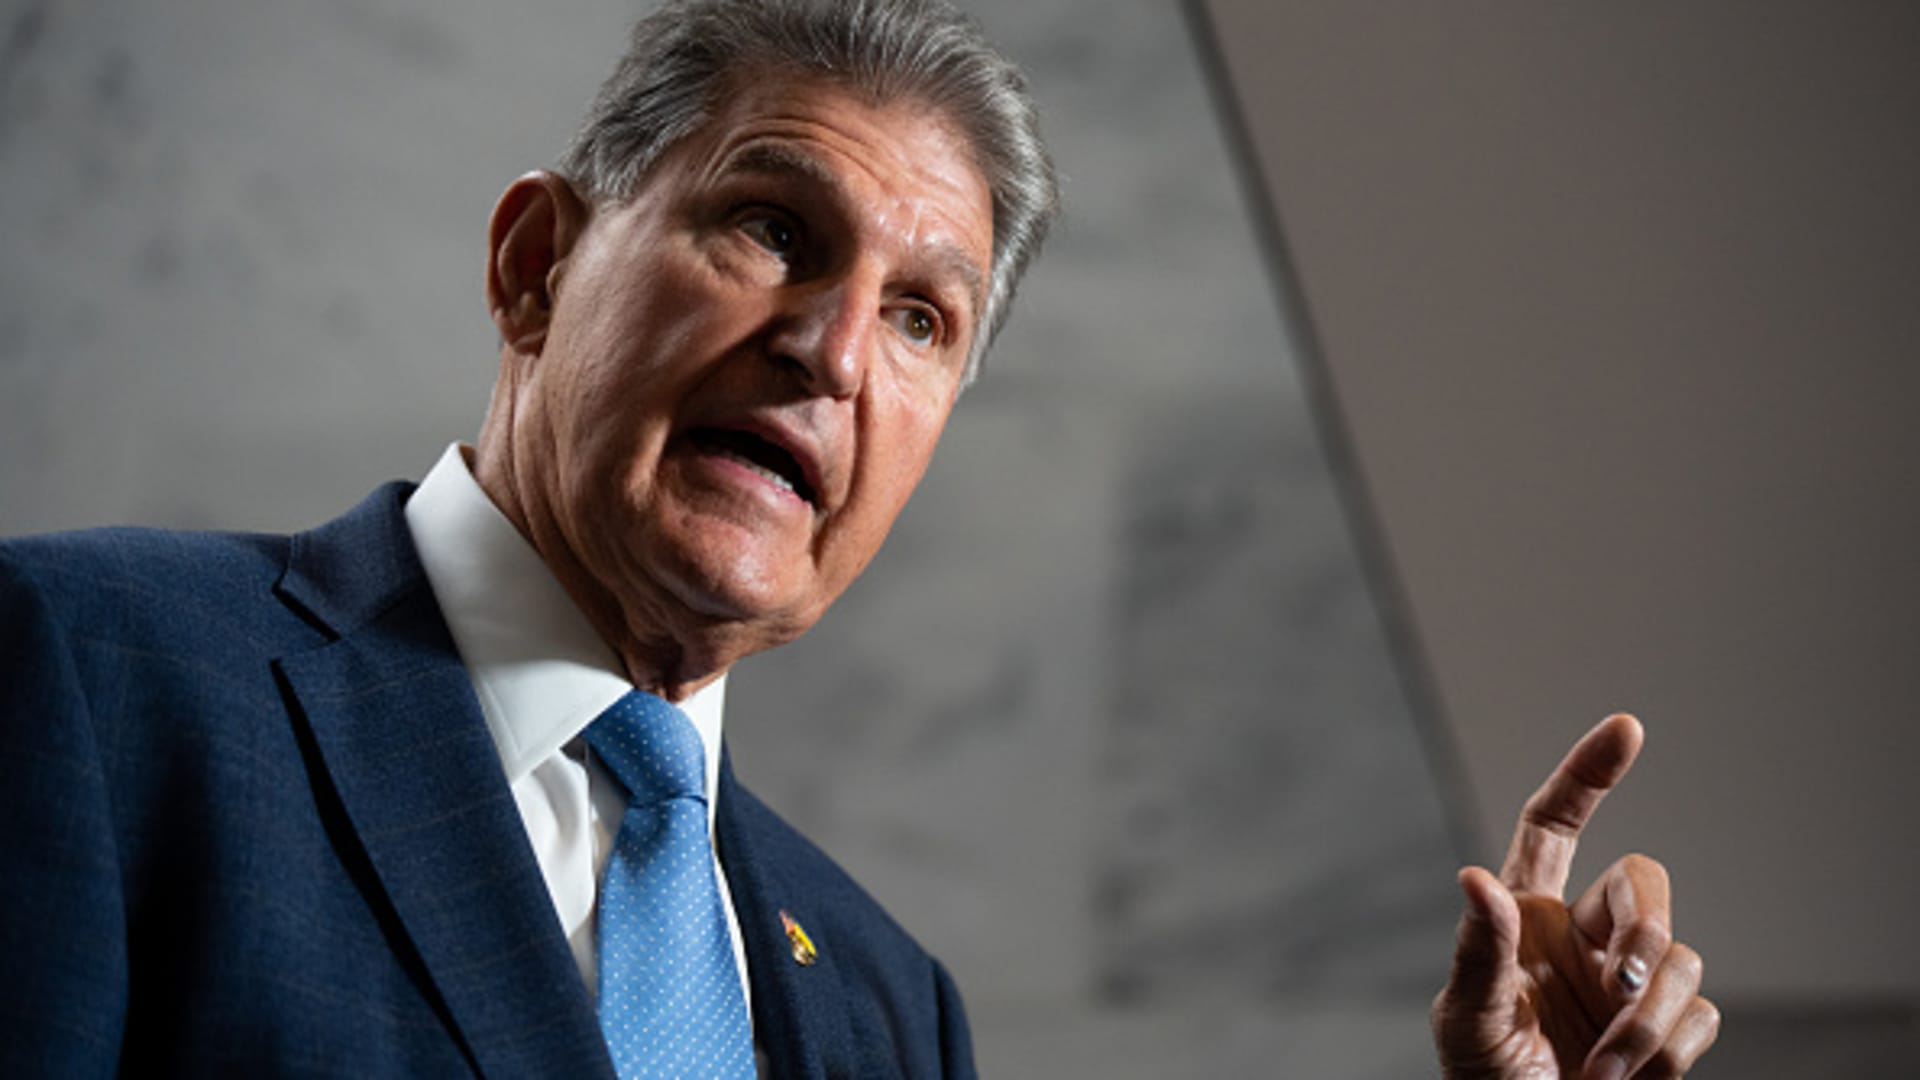 Sen. Joe Manchin, D-W. Va., speaks to the cameras about the reconciliation bill in the Hart Senate Office Building on Monday, August 1, 2022.